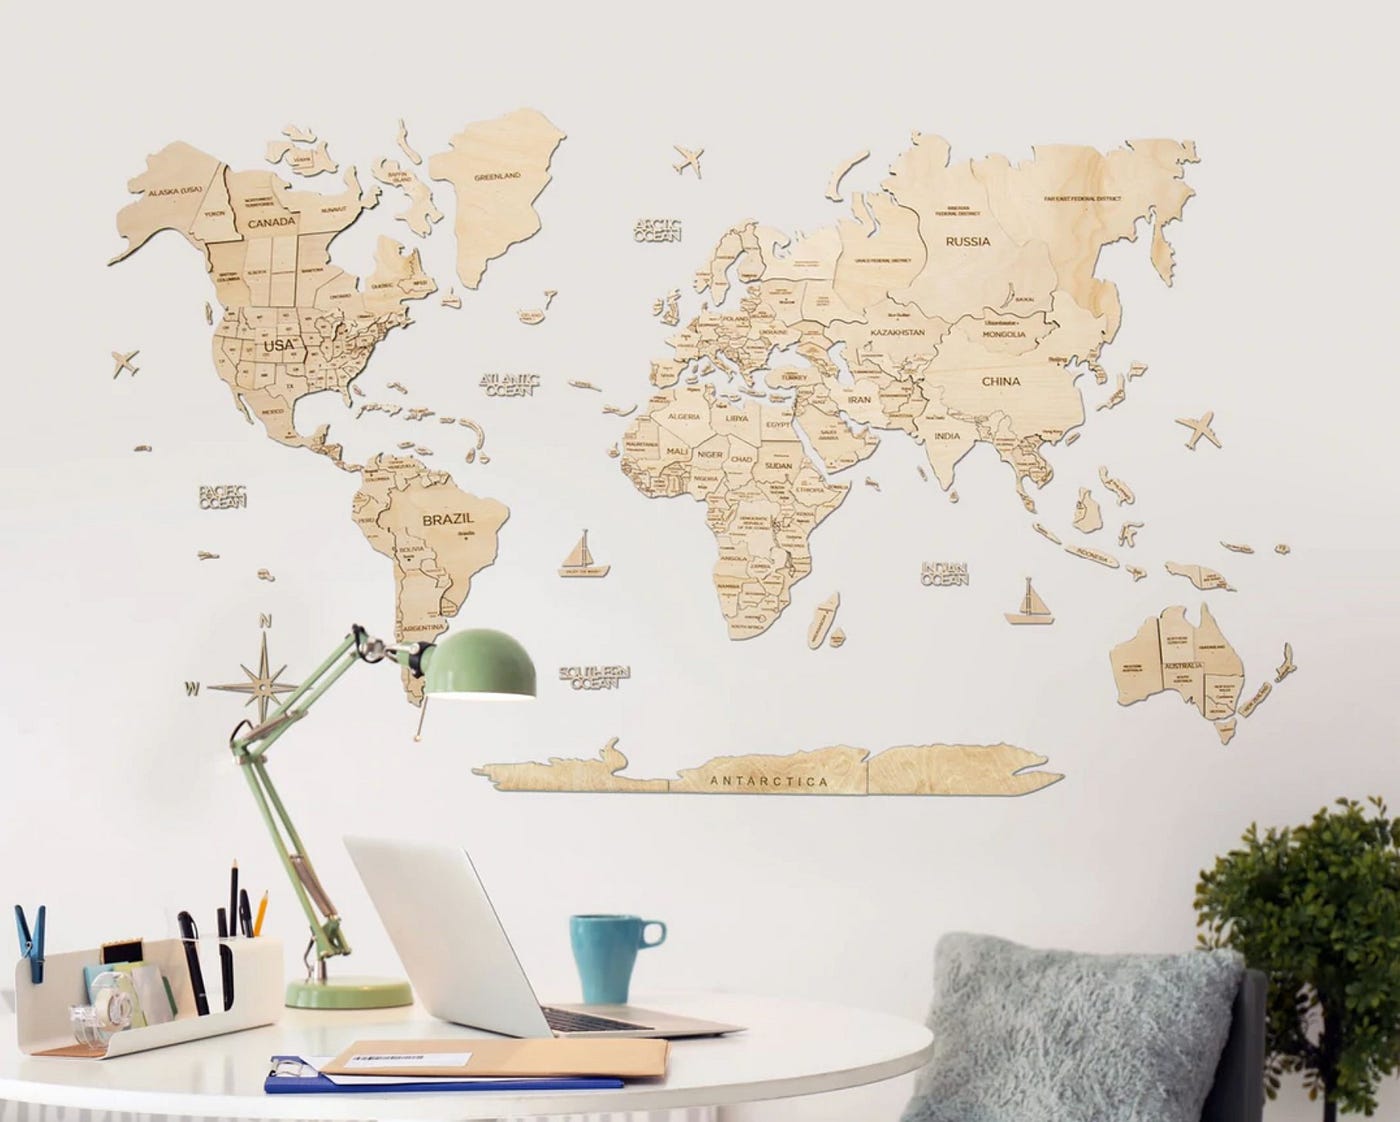 3D Wooden World Map Light from Enjoy The Wood ‣ Good Price, Reviews